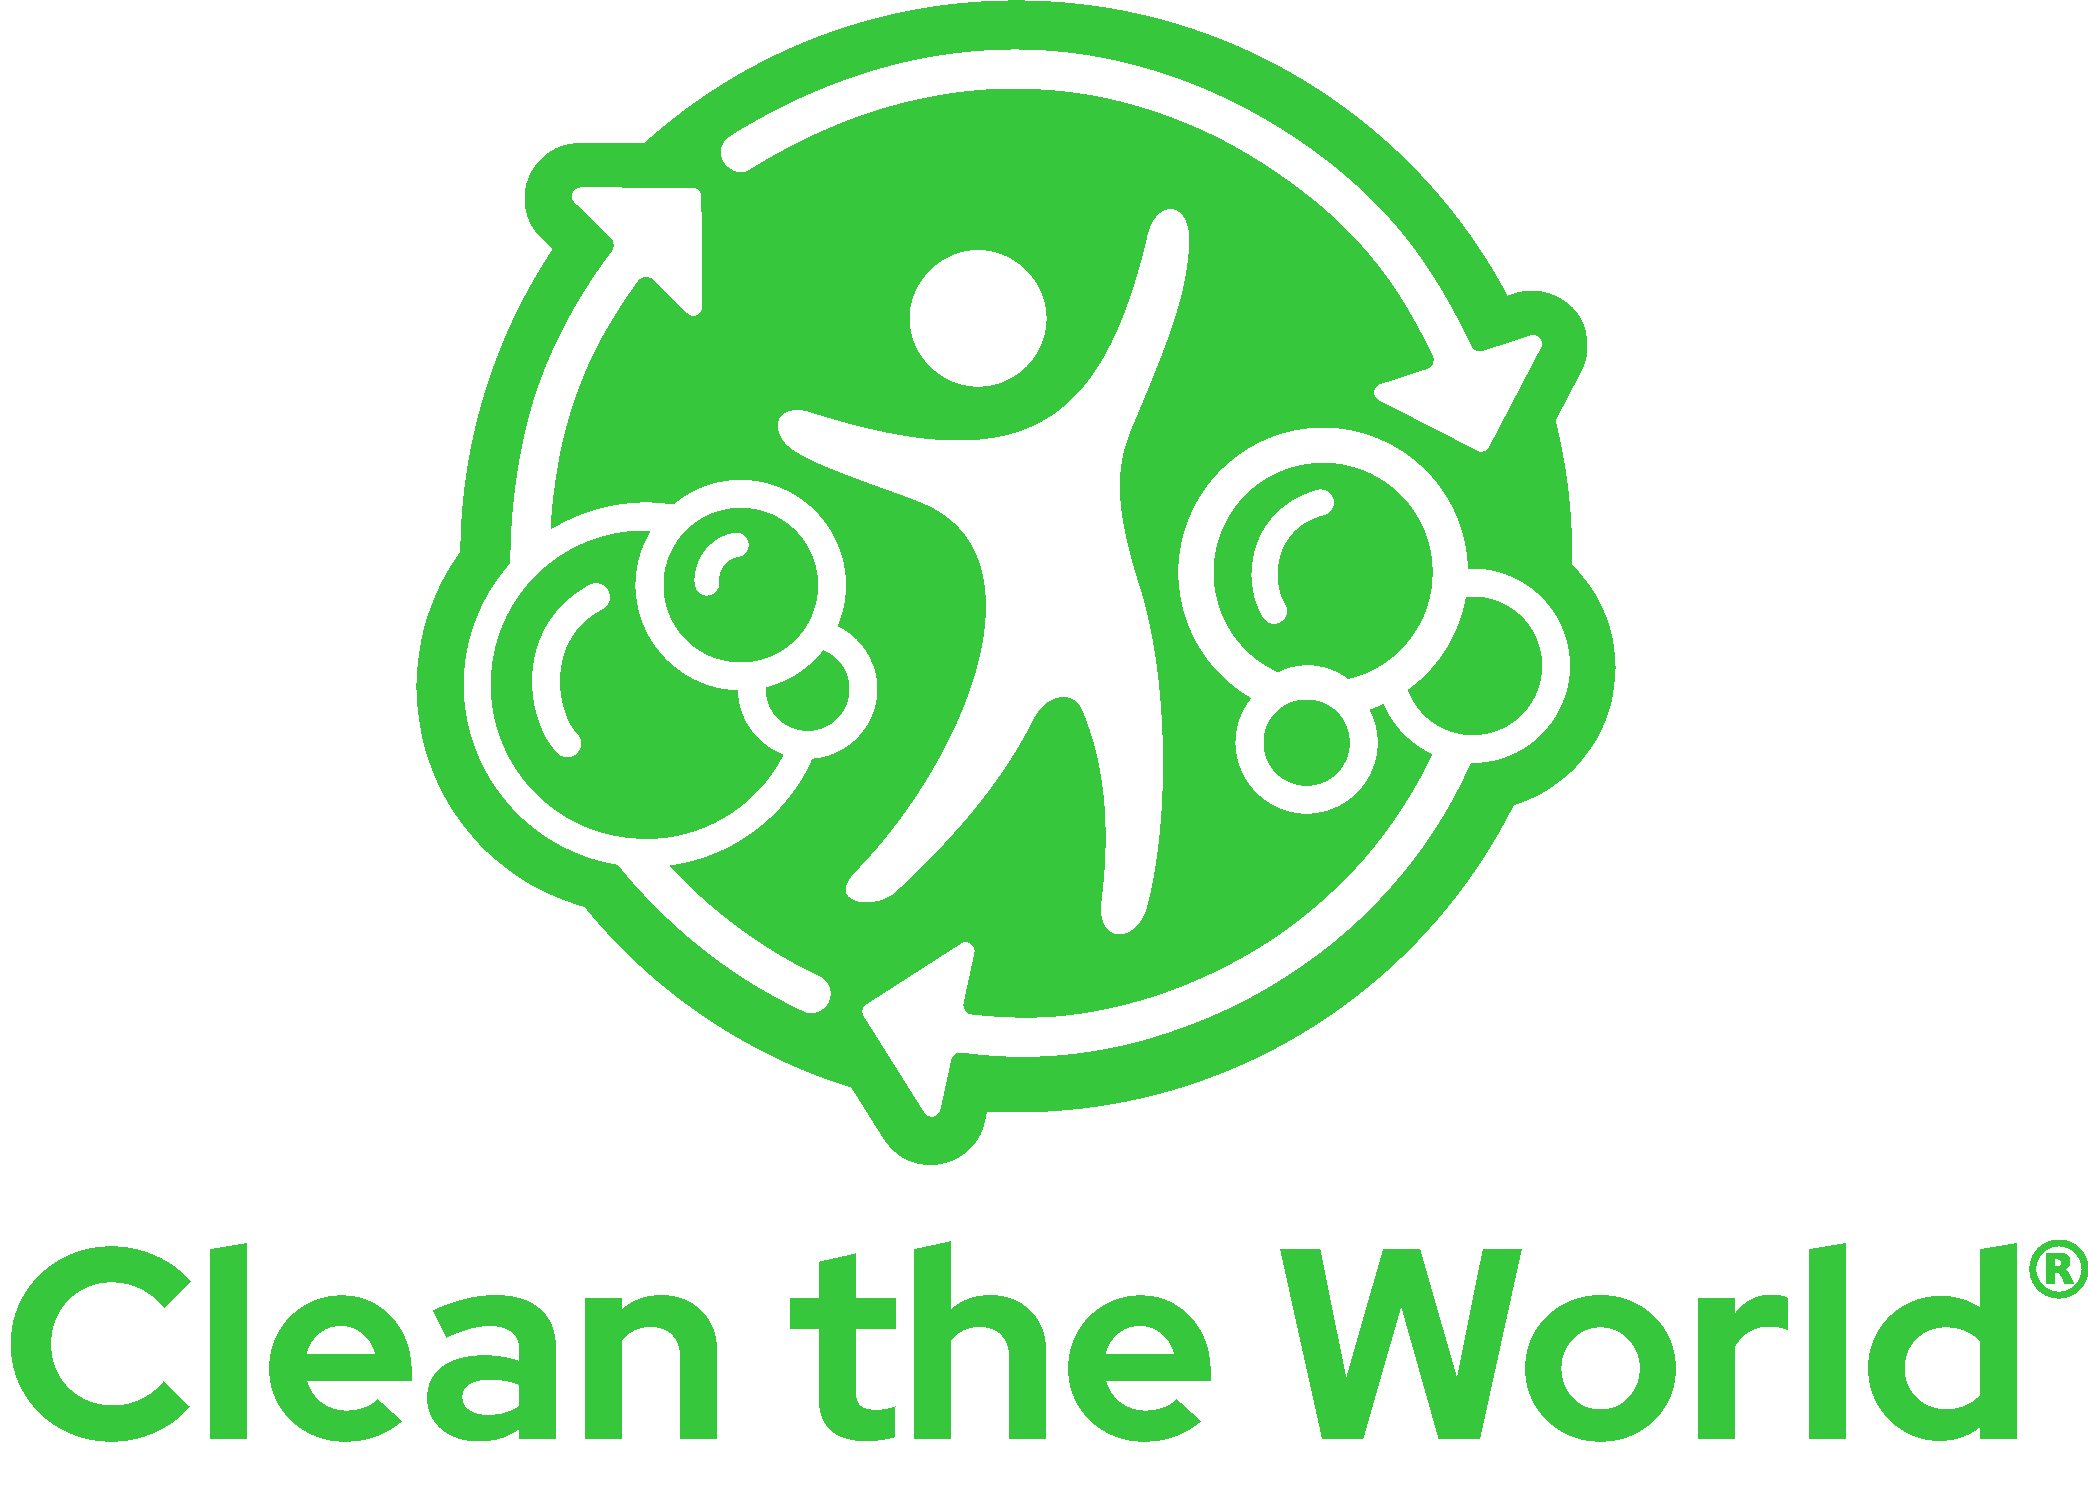 Clean The World